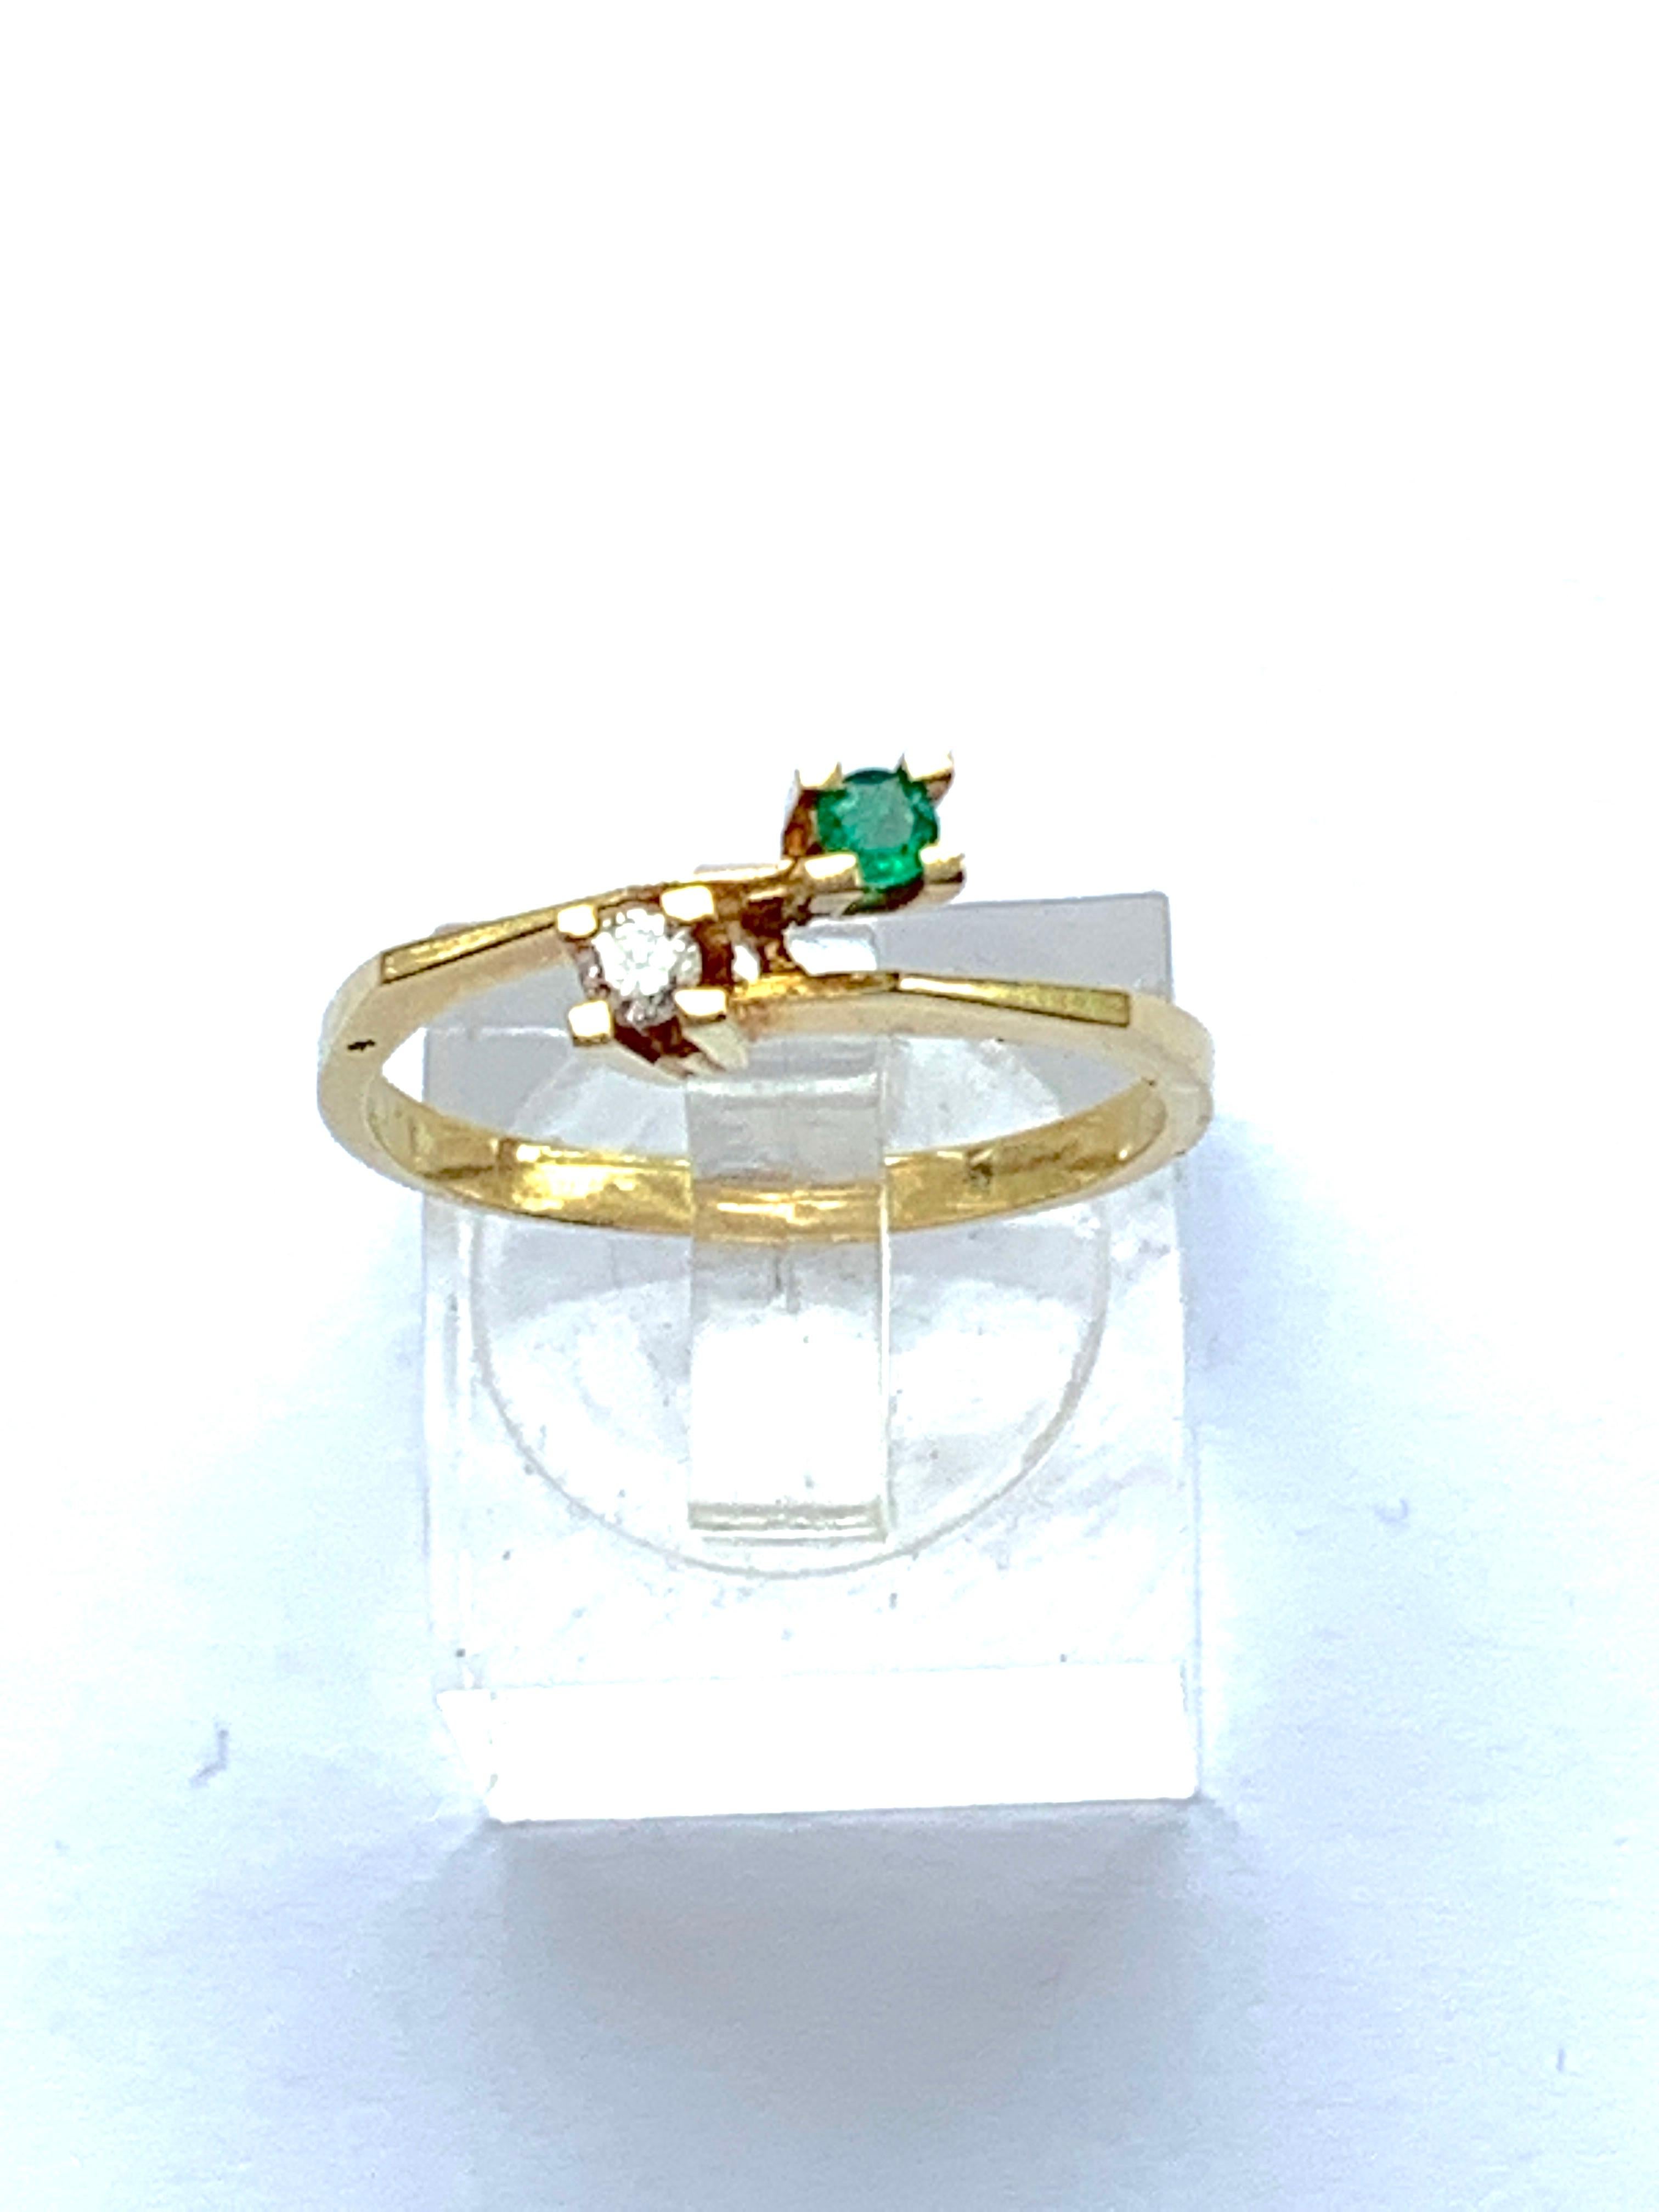 Mid Century Circa 1950s
18ct 750 Gold Ring
Marked 18k
with High Quality Stones

With Tension set Natural Diamond & Natural Emerald
Each stone measure approx 2mm
The Diamond is cut as a solitaire
The Emerald has a flat base.

Inner diameter is